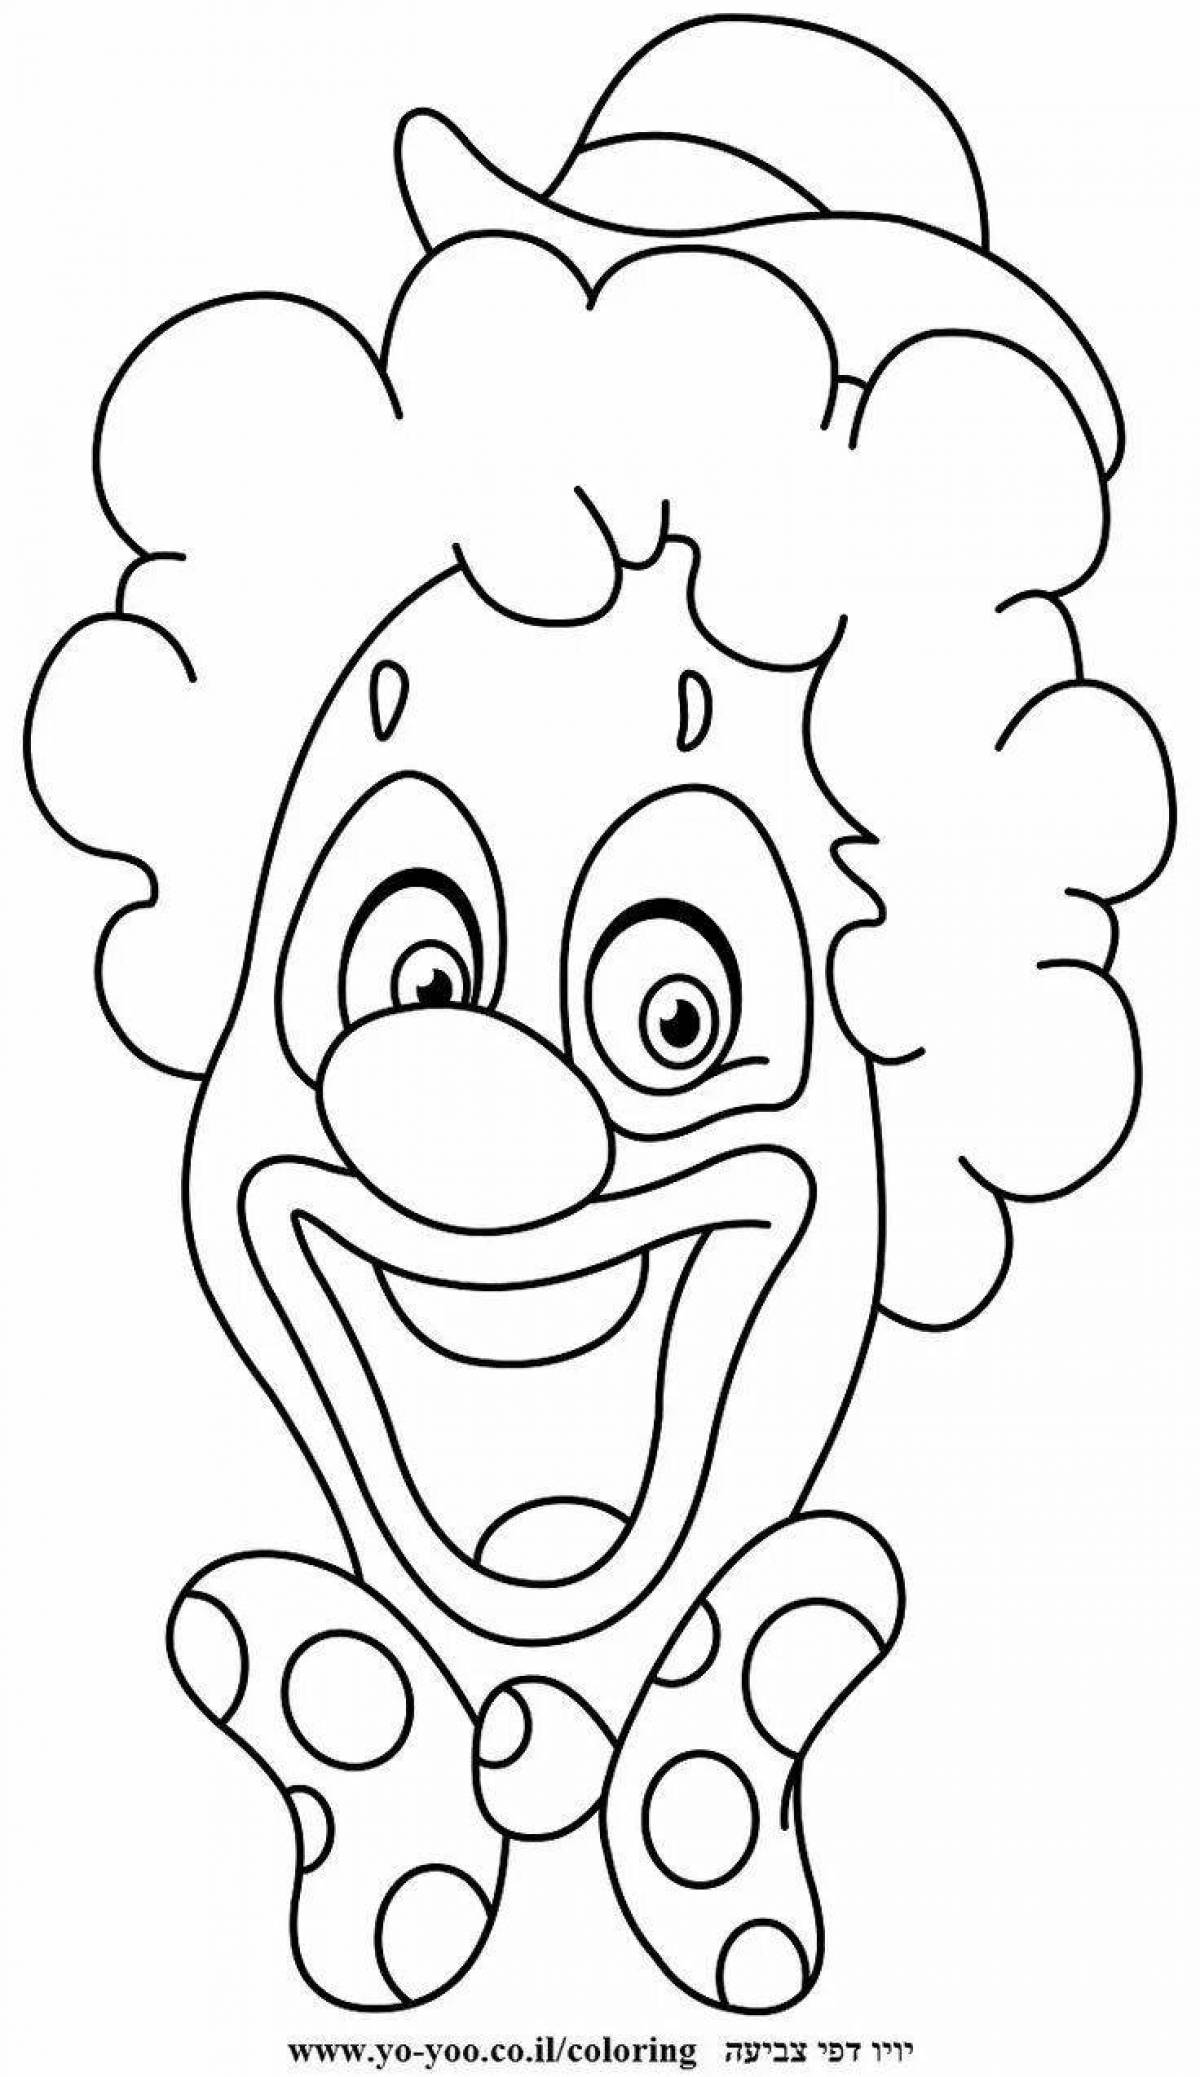 Cute clown face coloring page for kids